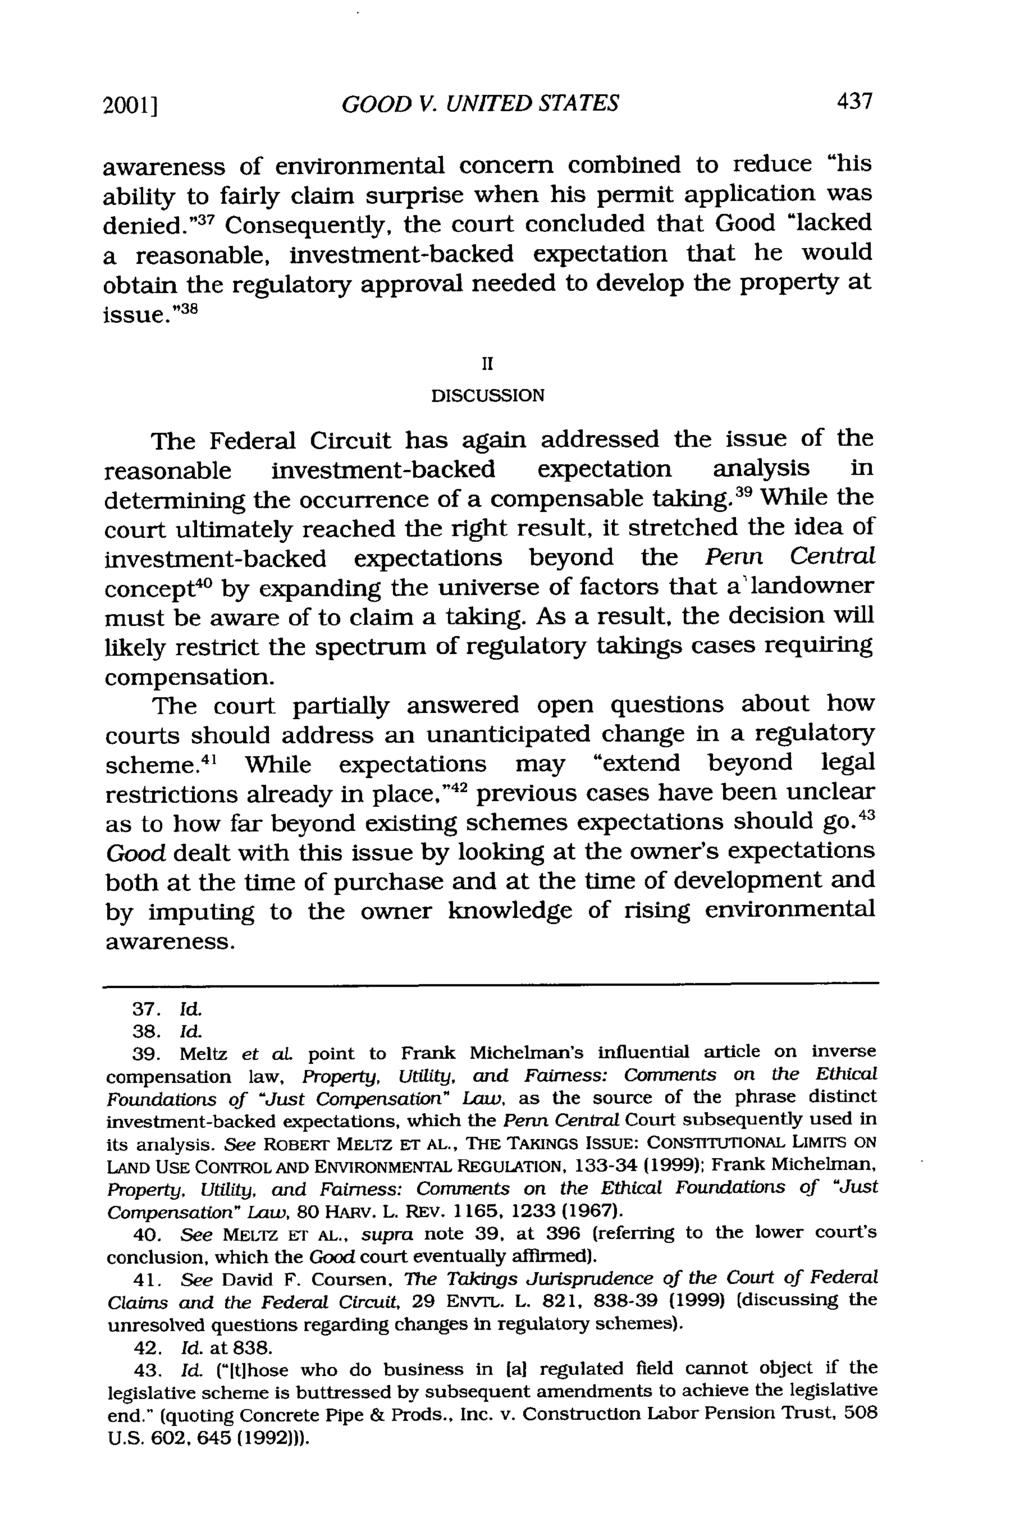 20011 GOOD V. UNITED STATES awareness of environmental concern combined to reduce "his ability to fairly claim surprise when his permit application was denied.